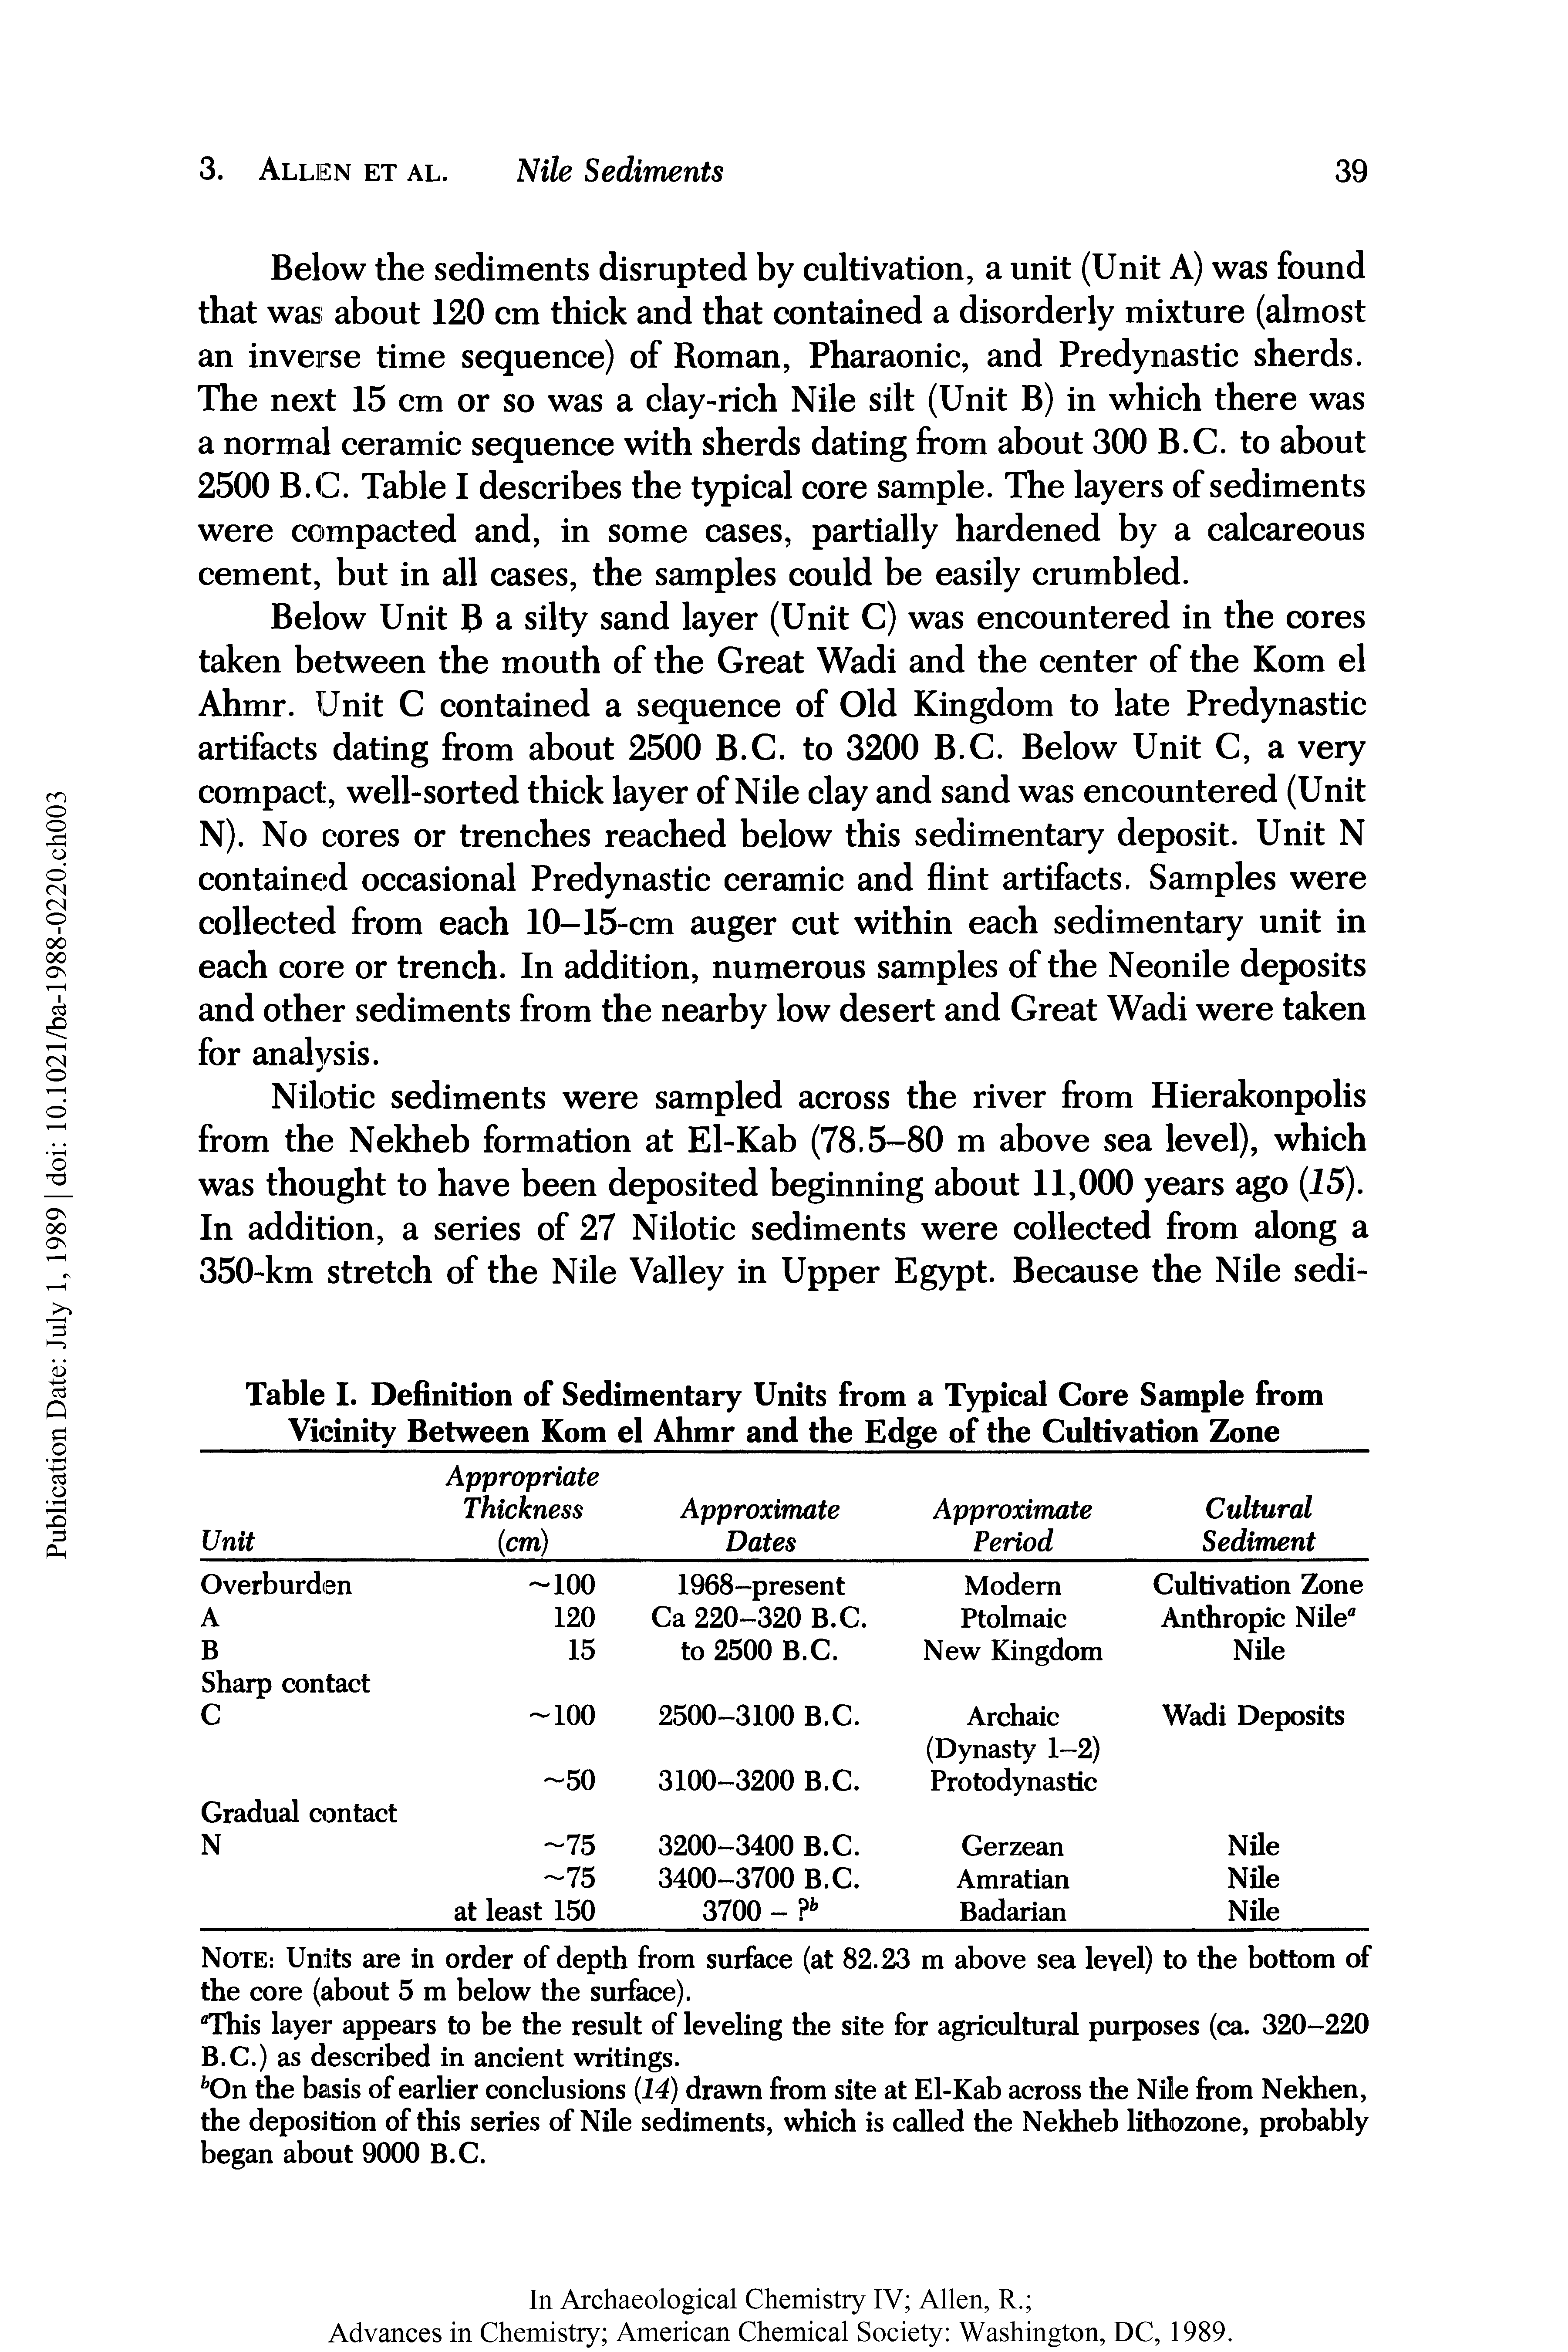 Table I. Definition of Sedimentary Units from a Typical Core Sample from Vicinity Between Kom el Ahmr and the Edge of the Cultivation Zone...